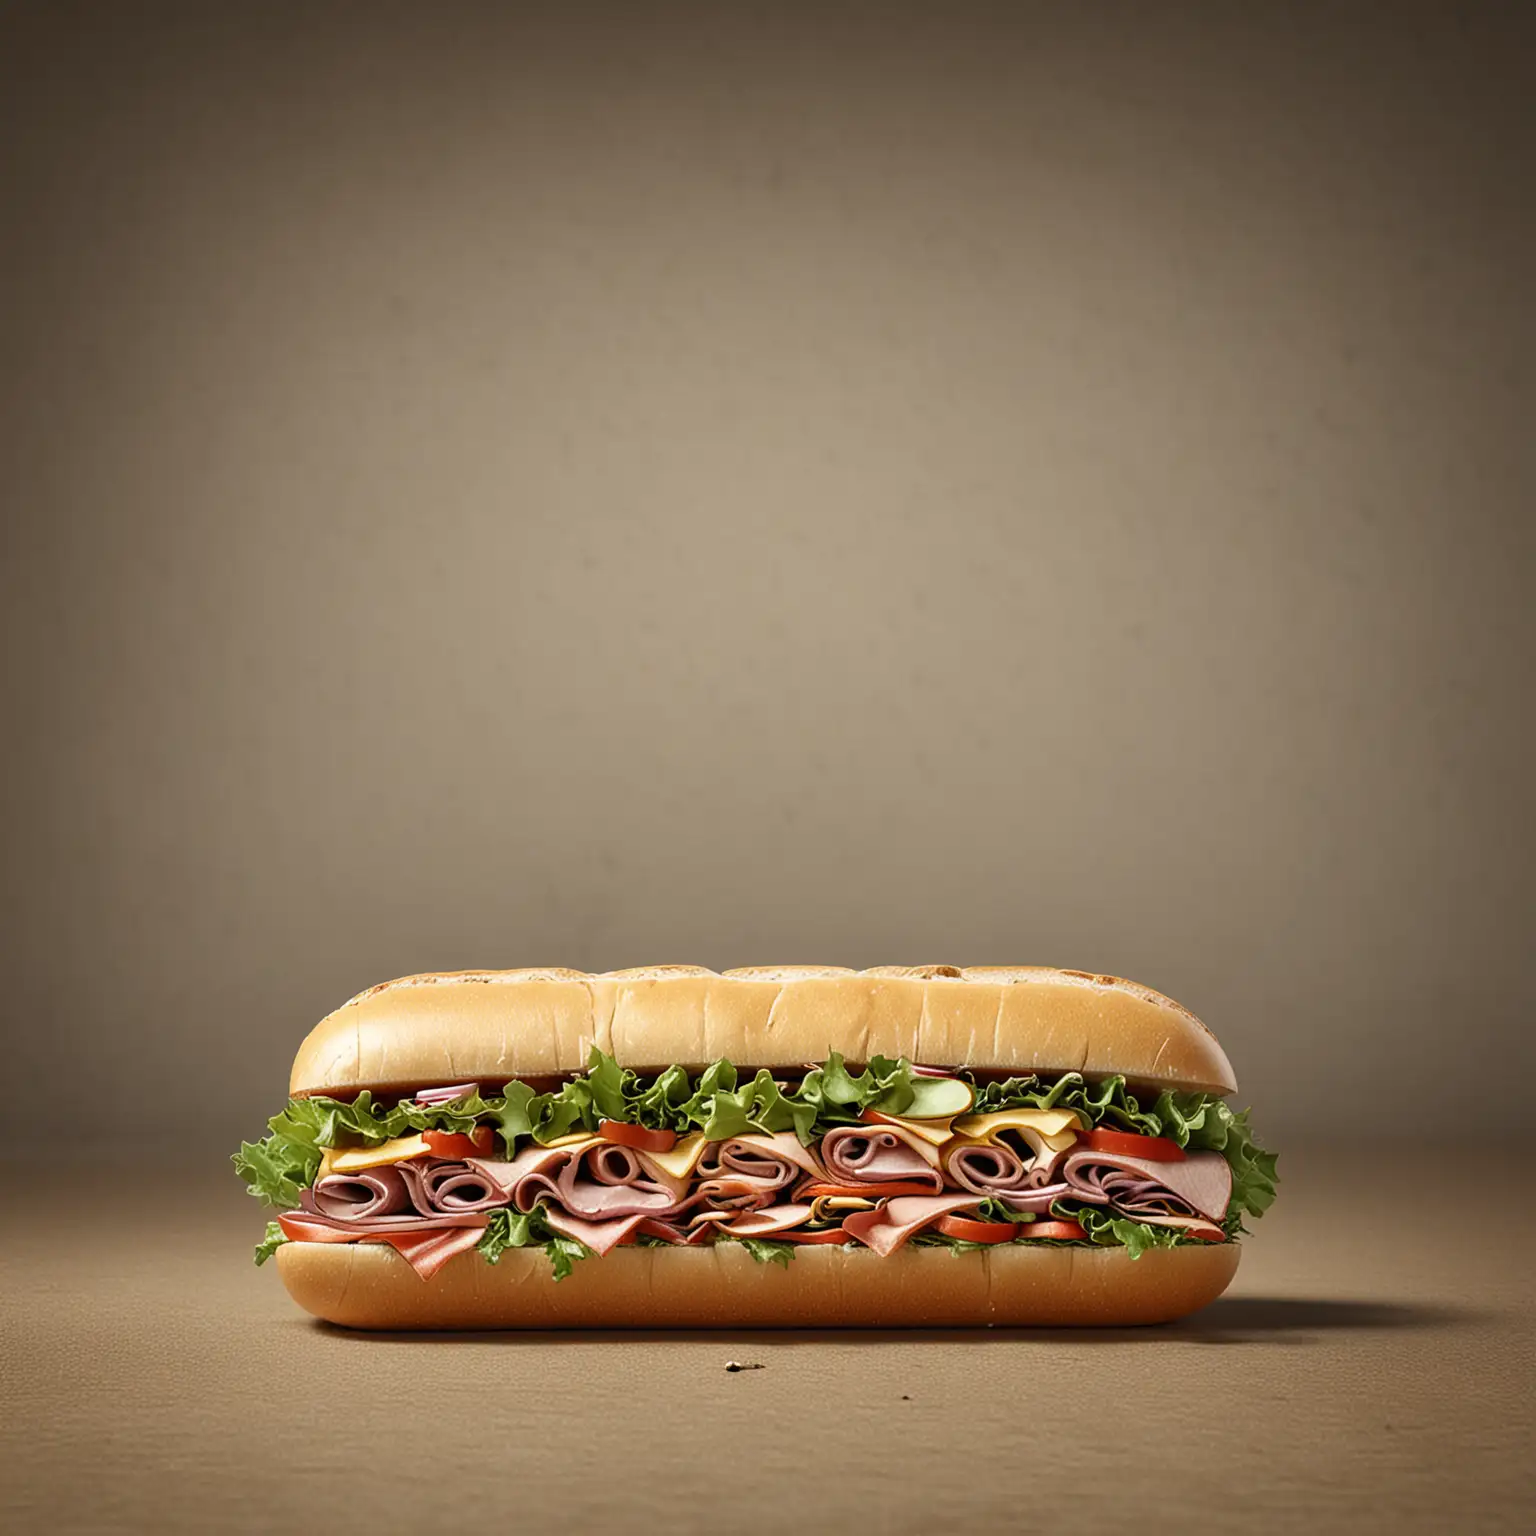 Simple and Realistic Subway Sandwich on Wooden Table